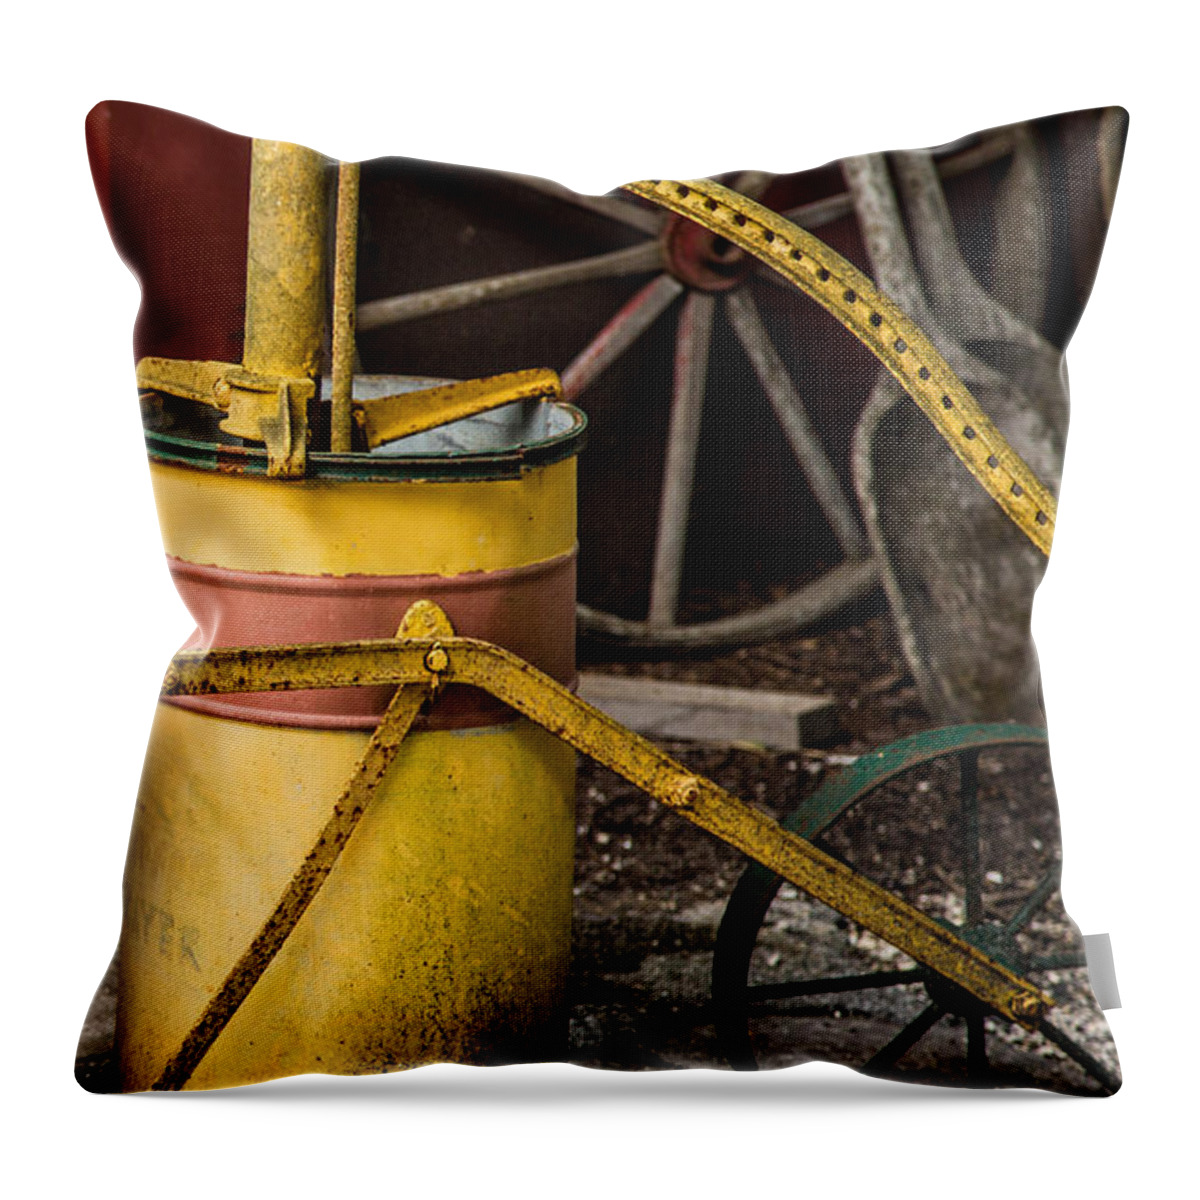 Oil Can Throw Pillow featuring the photograph Memories From Days Past by Rene Triay FineArt Photos